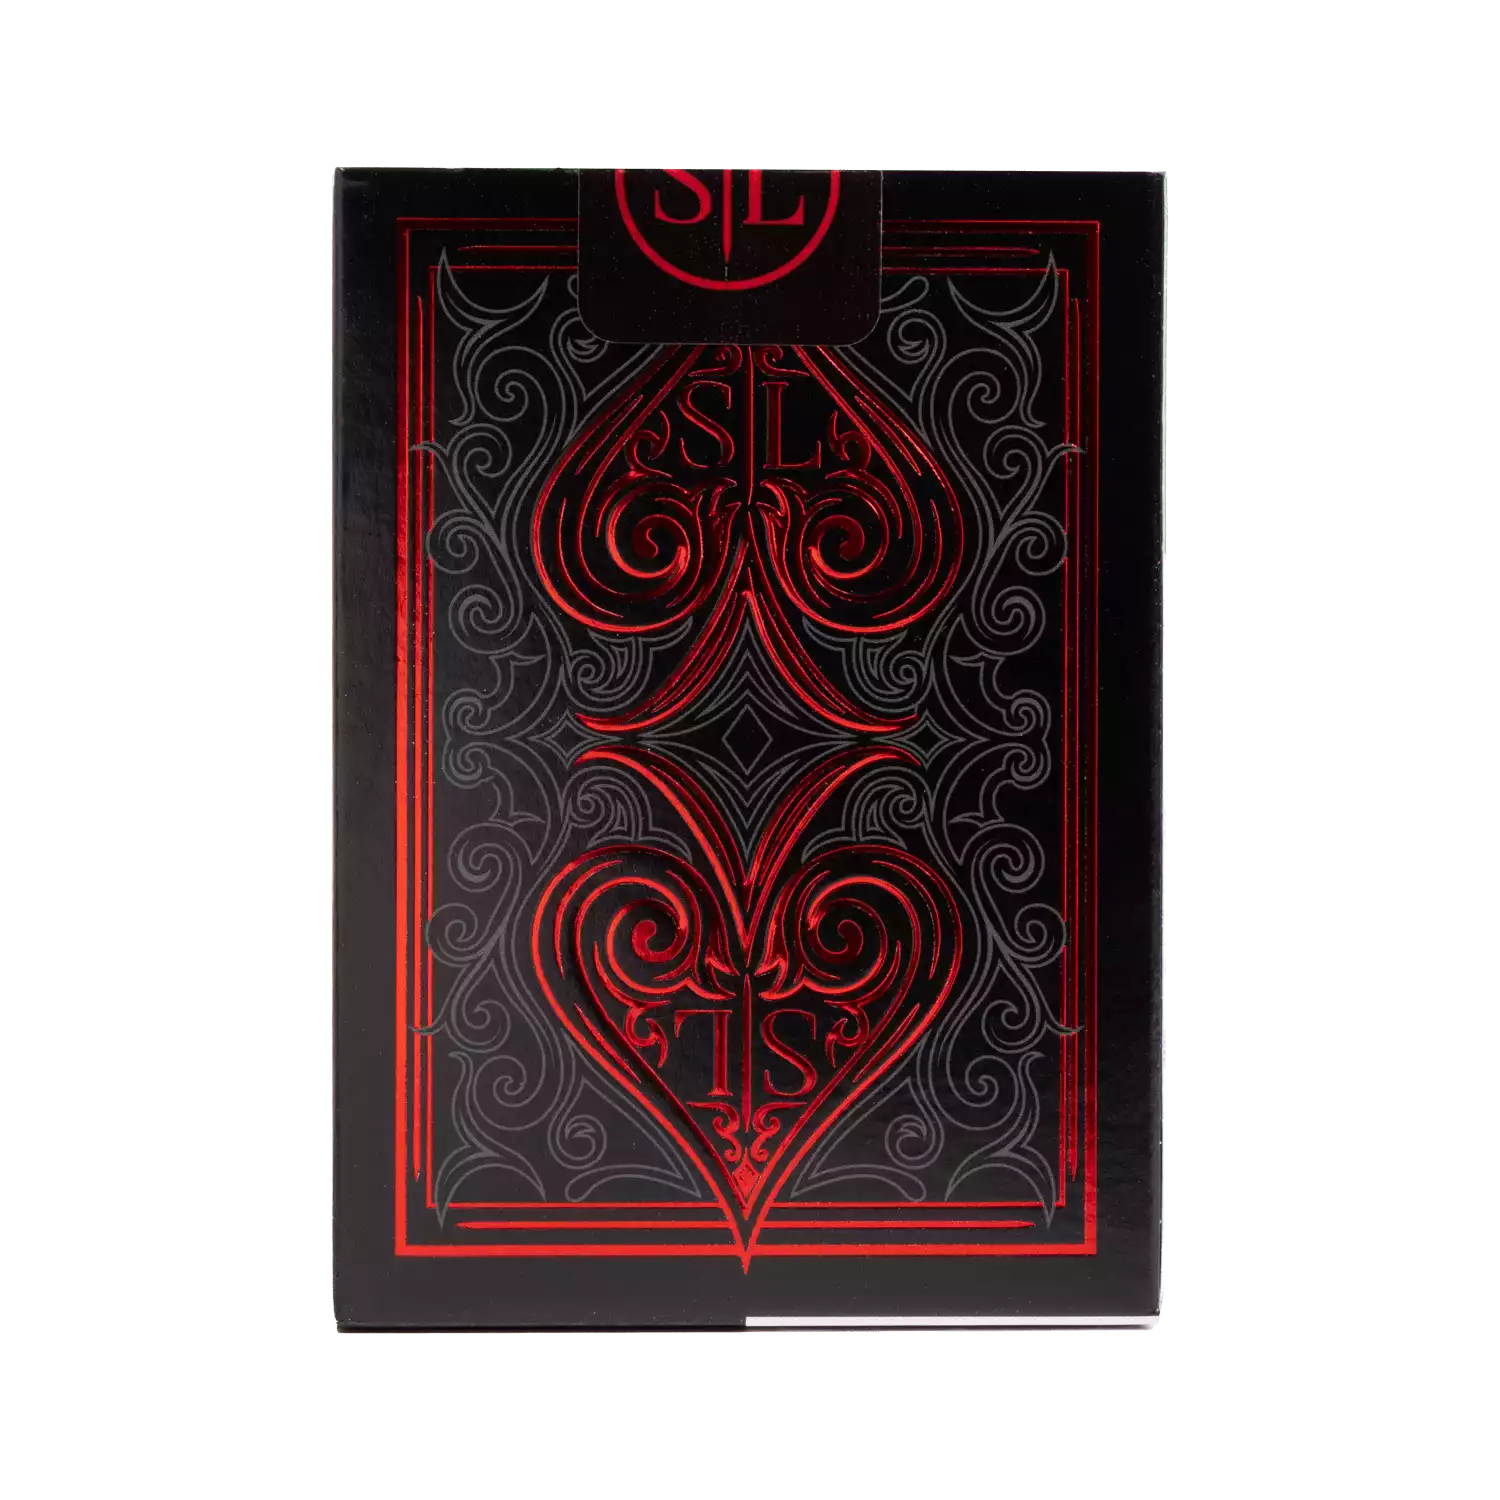 Bicycle Shin Lim Playing Cards - Eclipse Games Puzzles Novelties